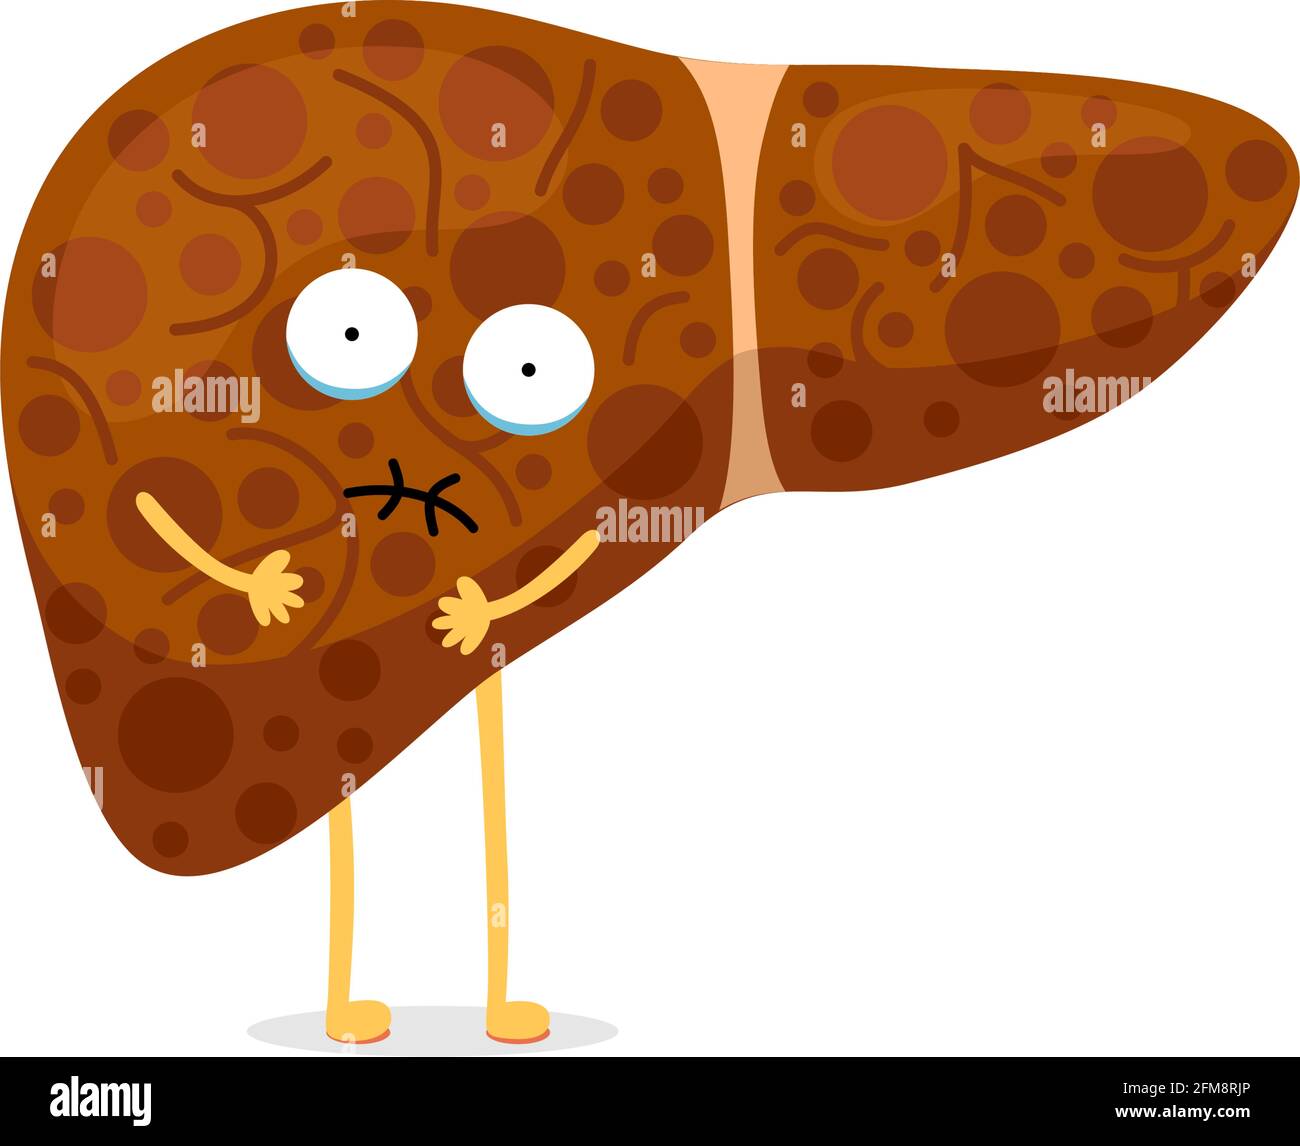 Sick unhealthy cartoon liver character suffers from jaundice or hepatitis and suffering pain. Human exocrine gland organ destruction concept. Vector hepatic mascot illustration Stock Vector